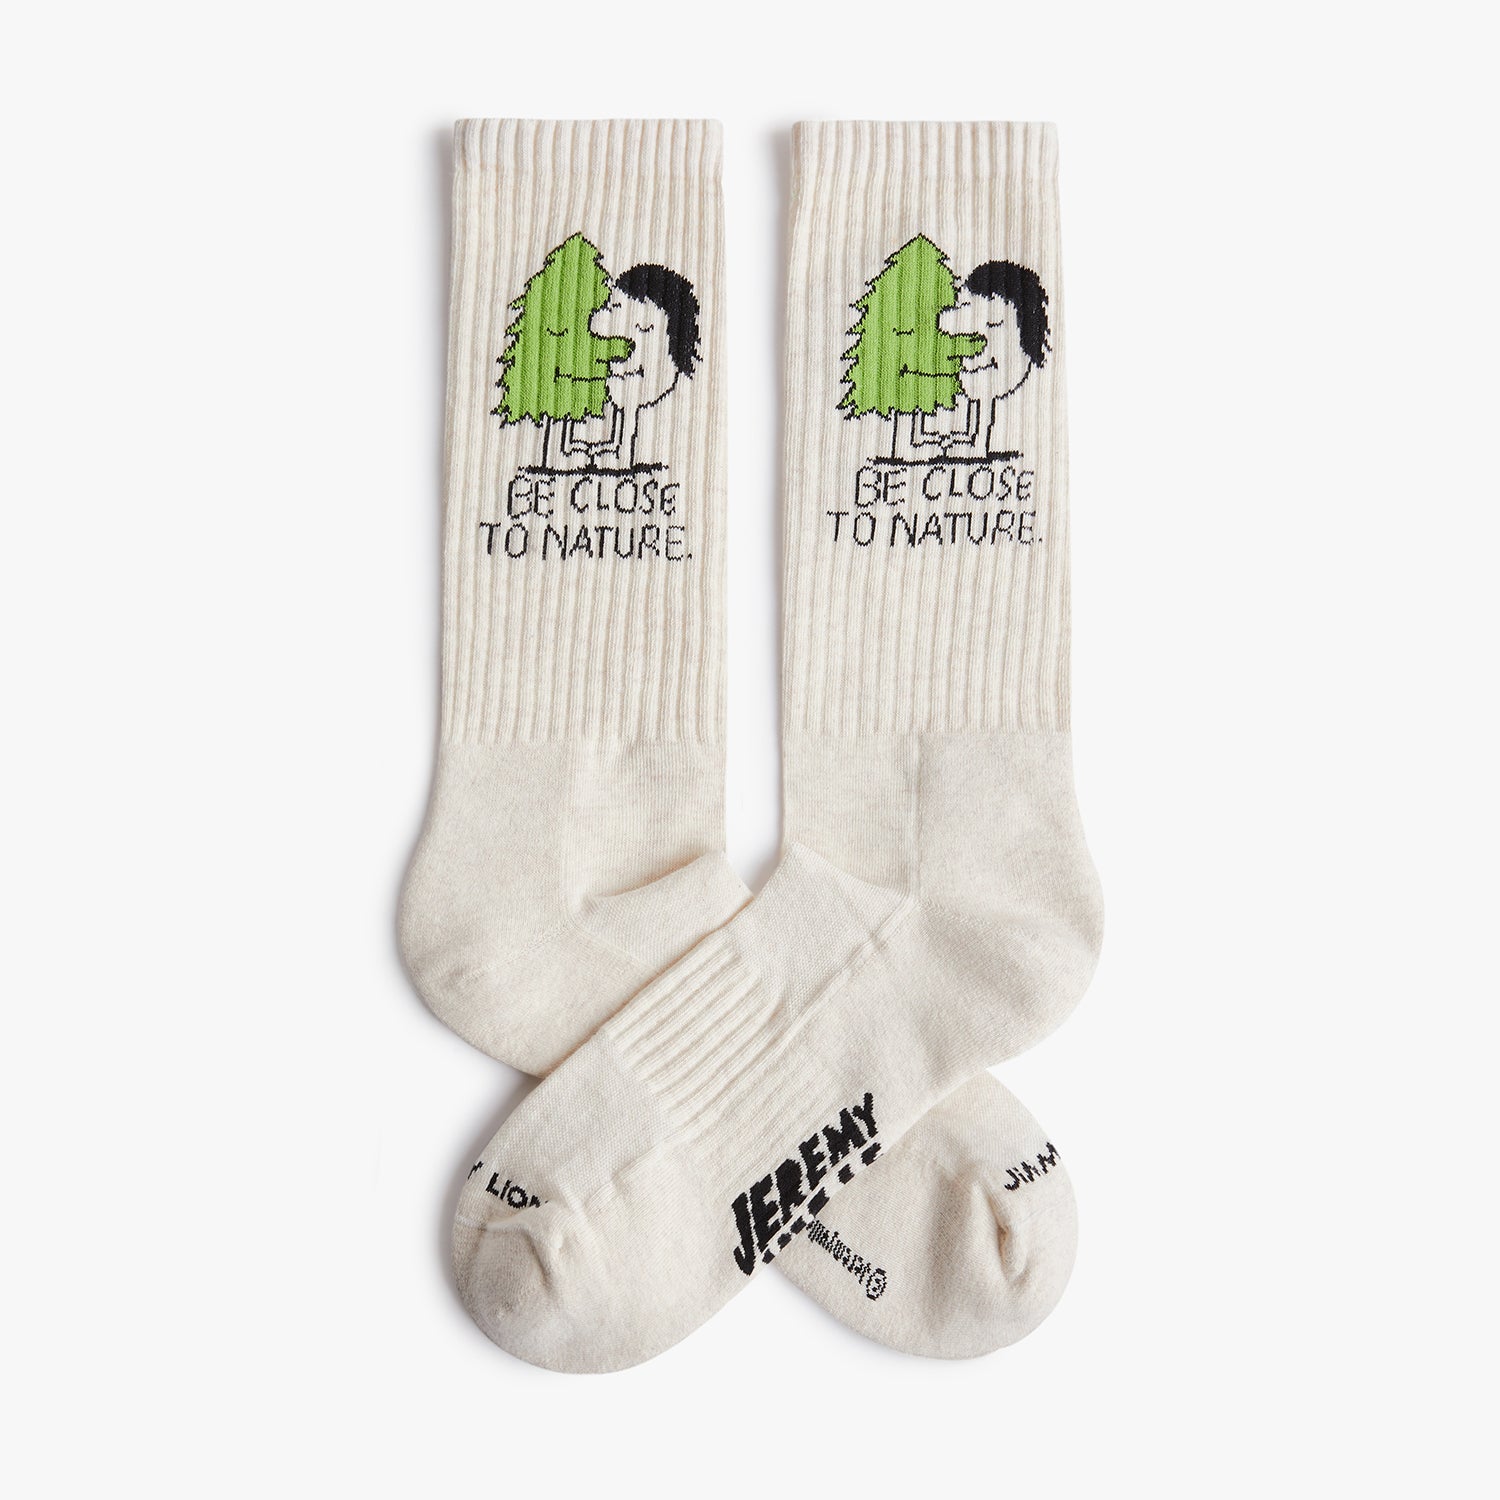 The Shining - REDRUM Socks - By Jimmy Lion - Stanley Kubrick Store